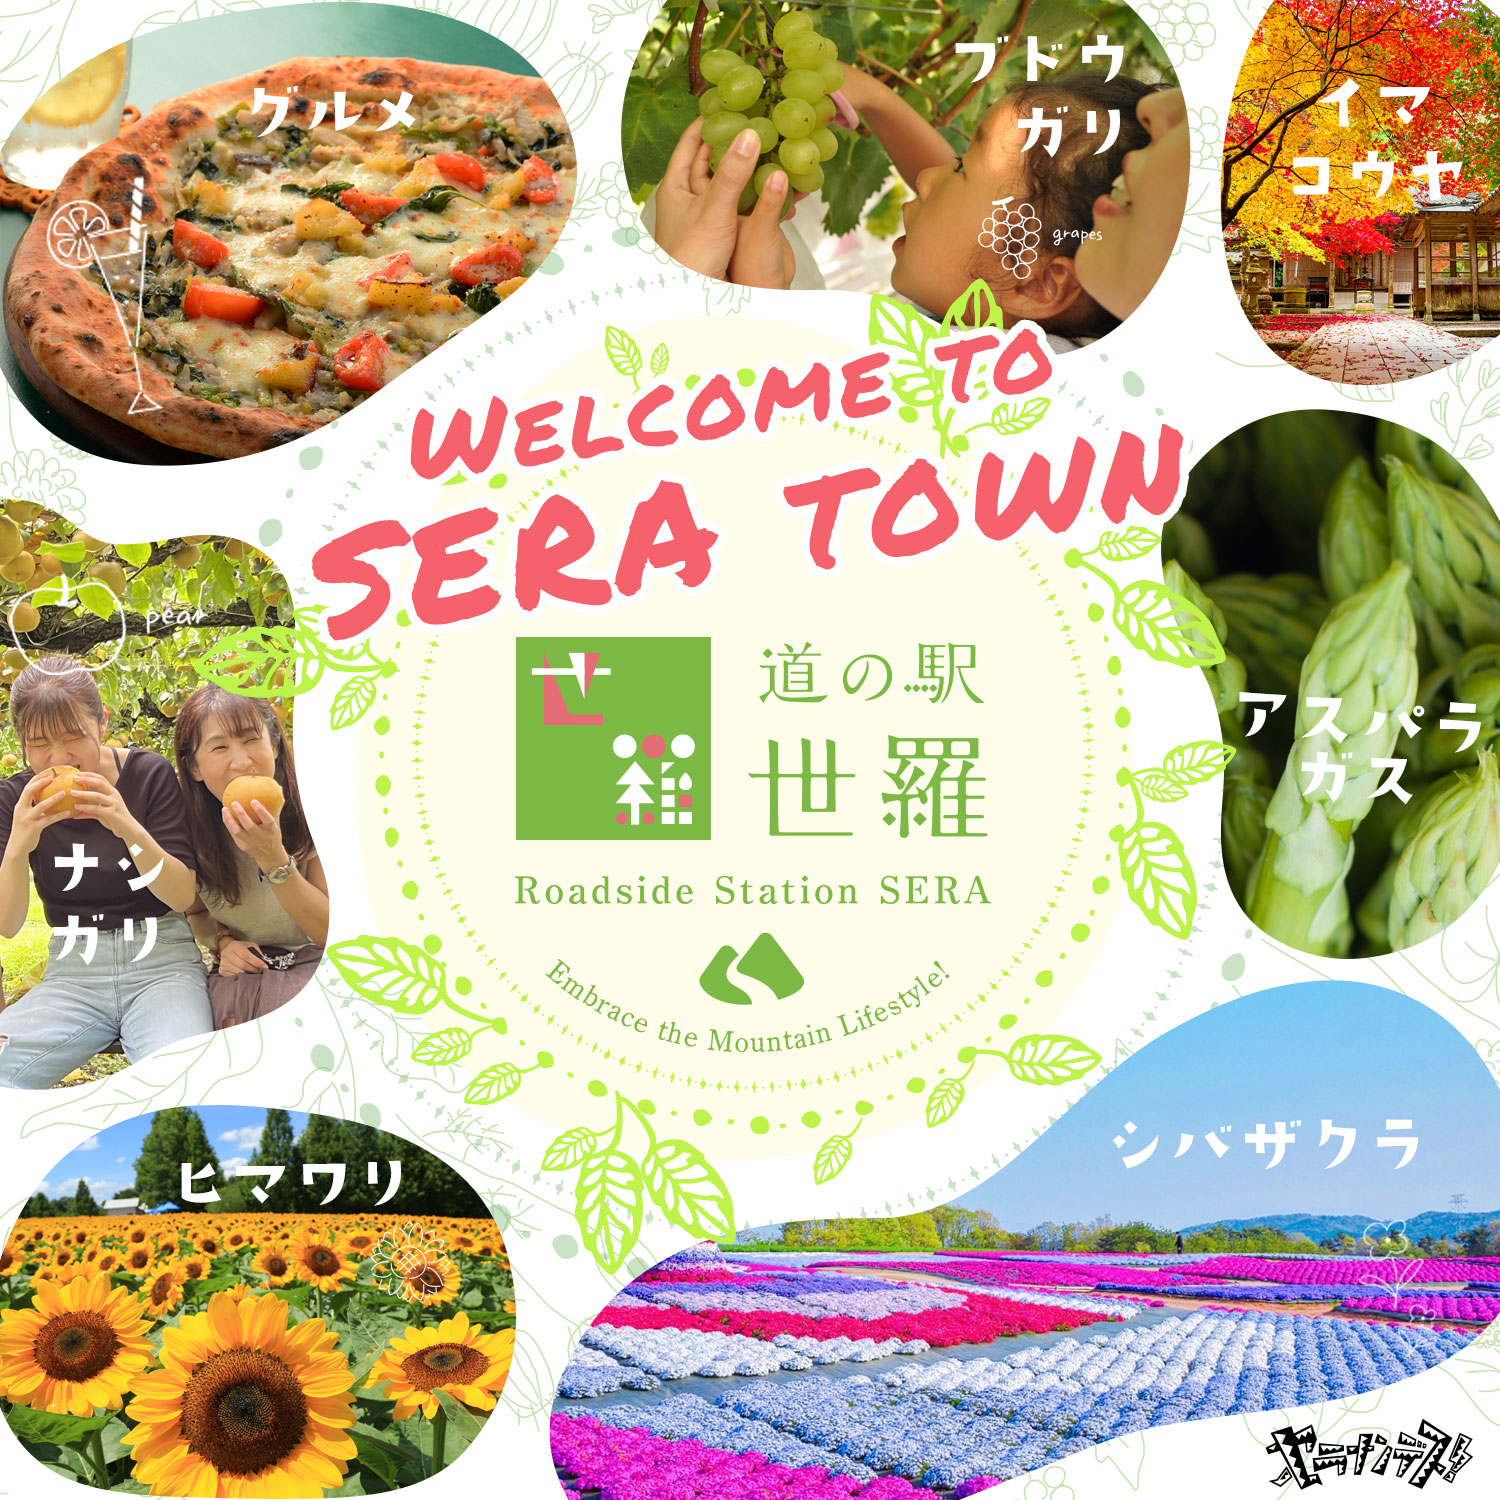 Welcome to Sera town